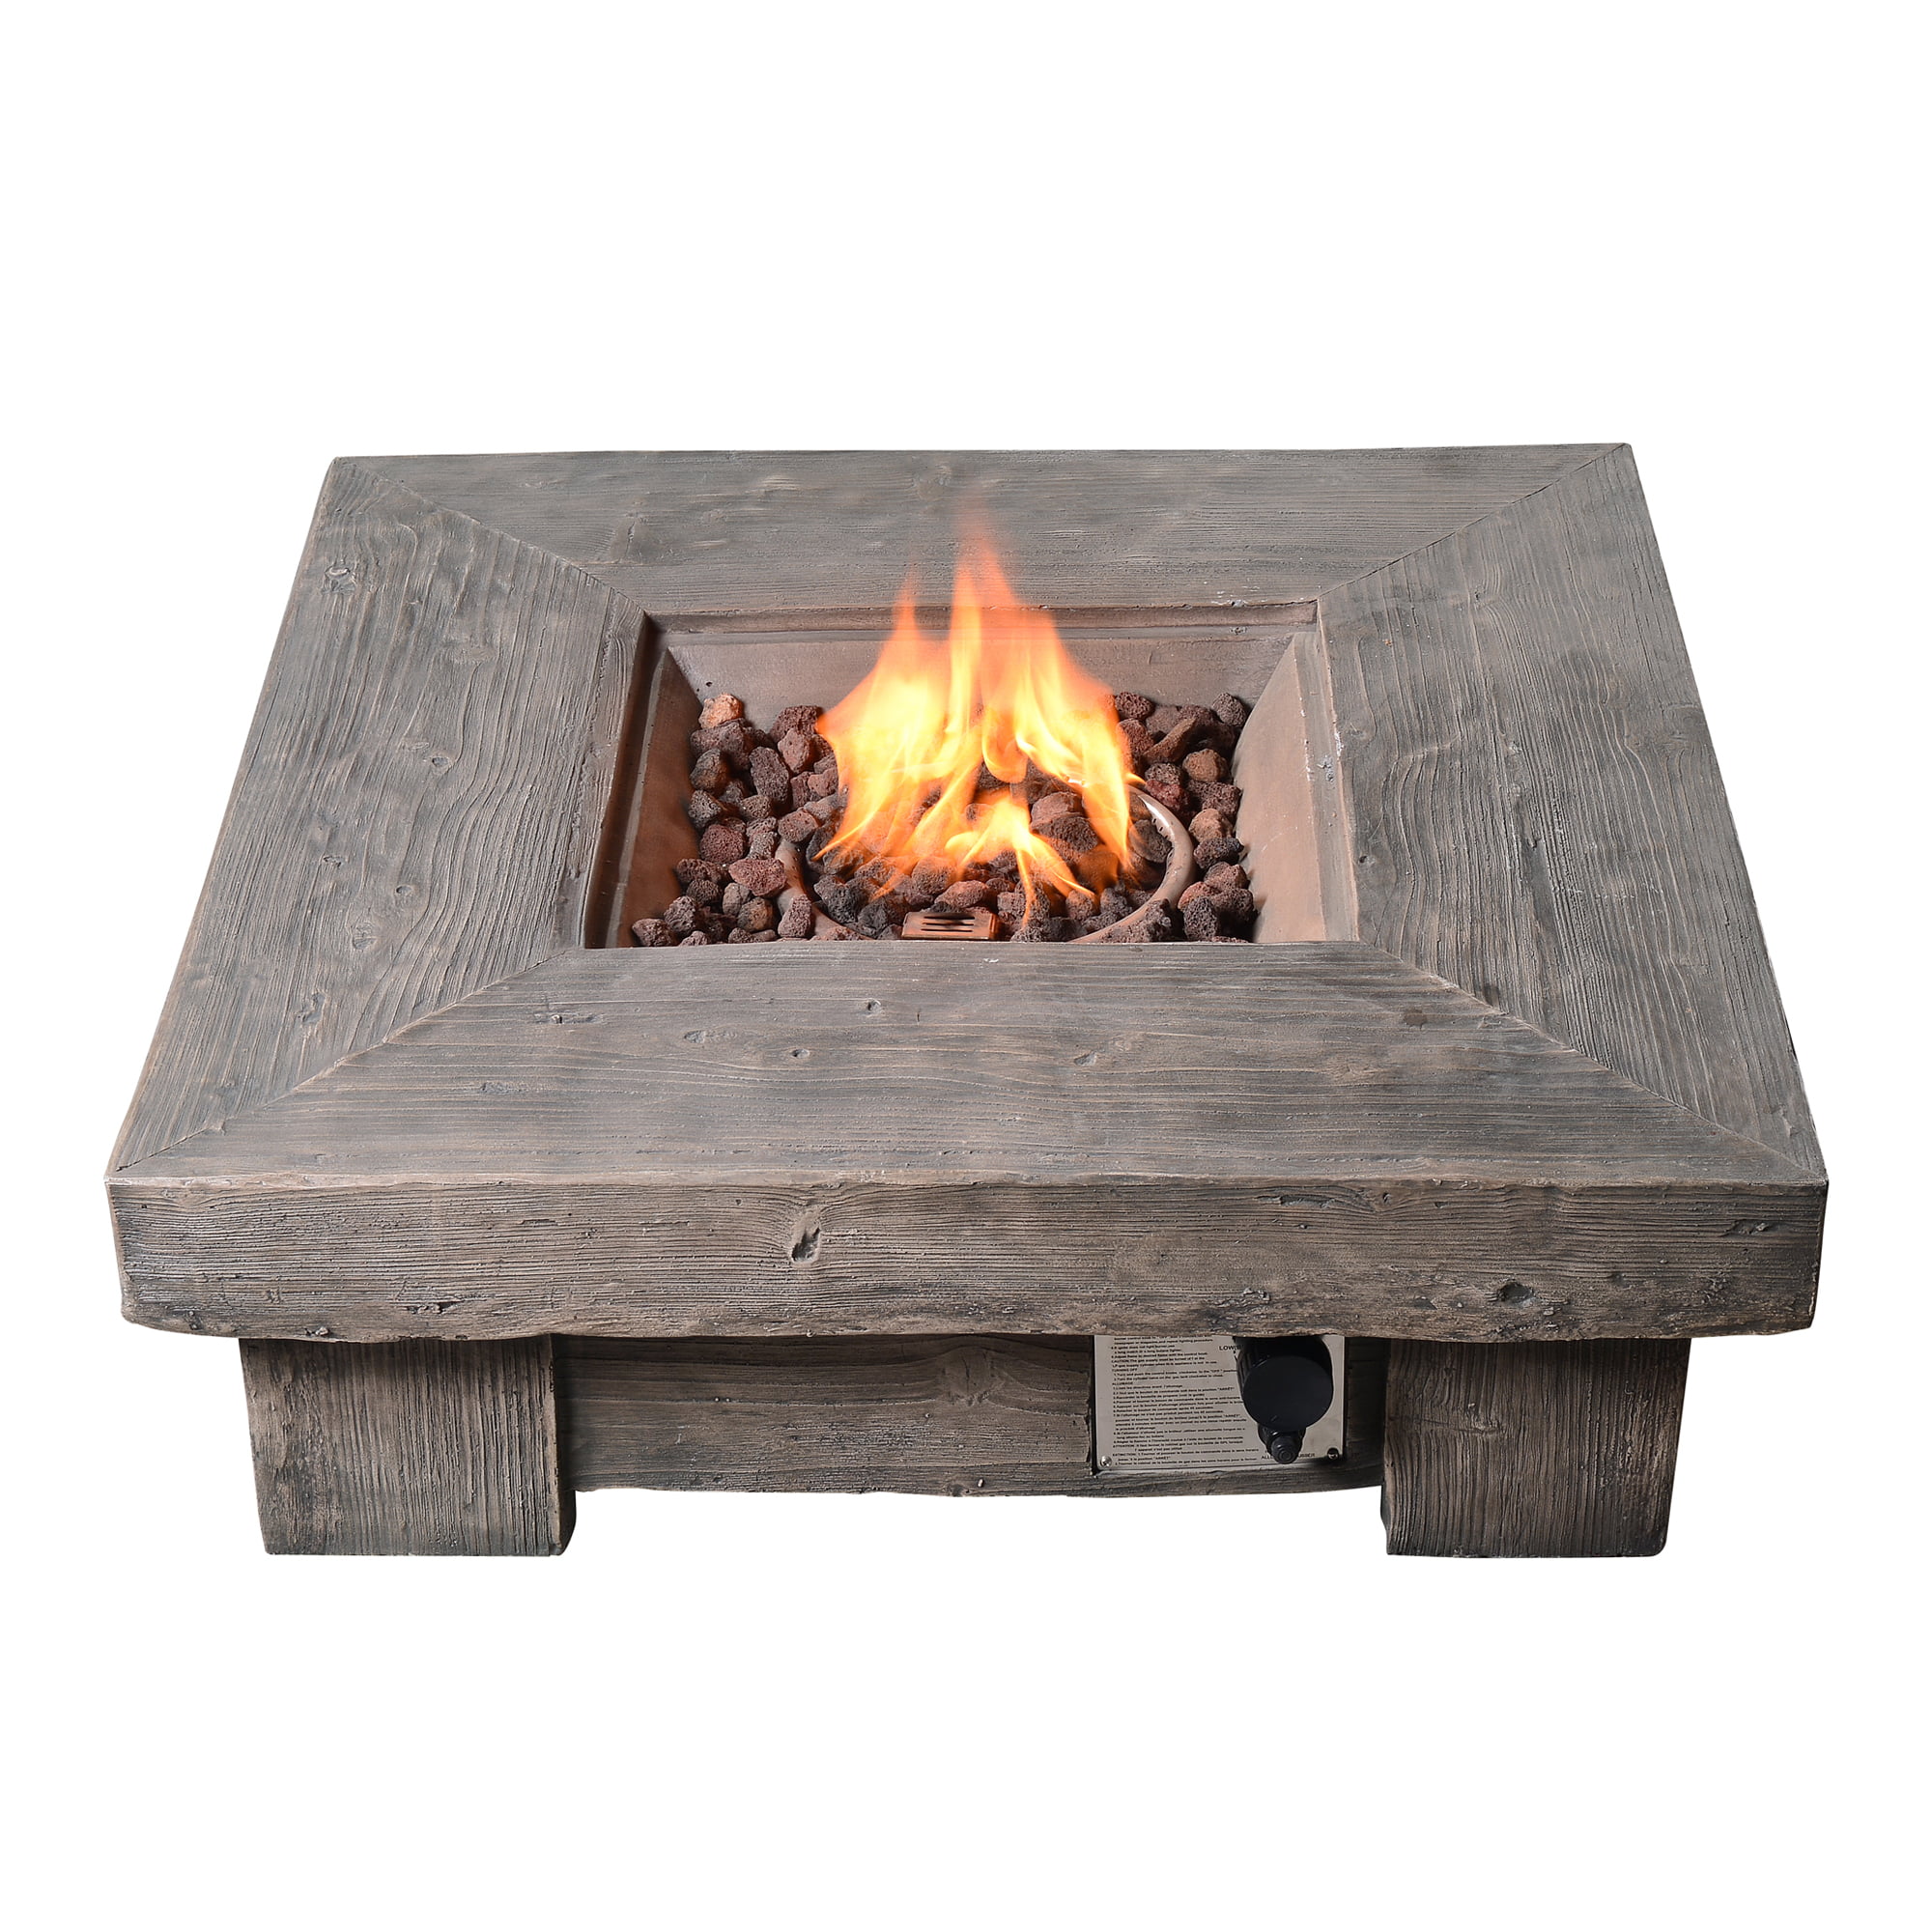 Teamson Home 35" Outdoor Square Wood Look Propane Gas Fire Pit